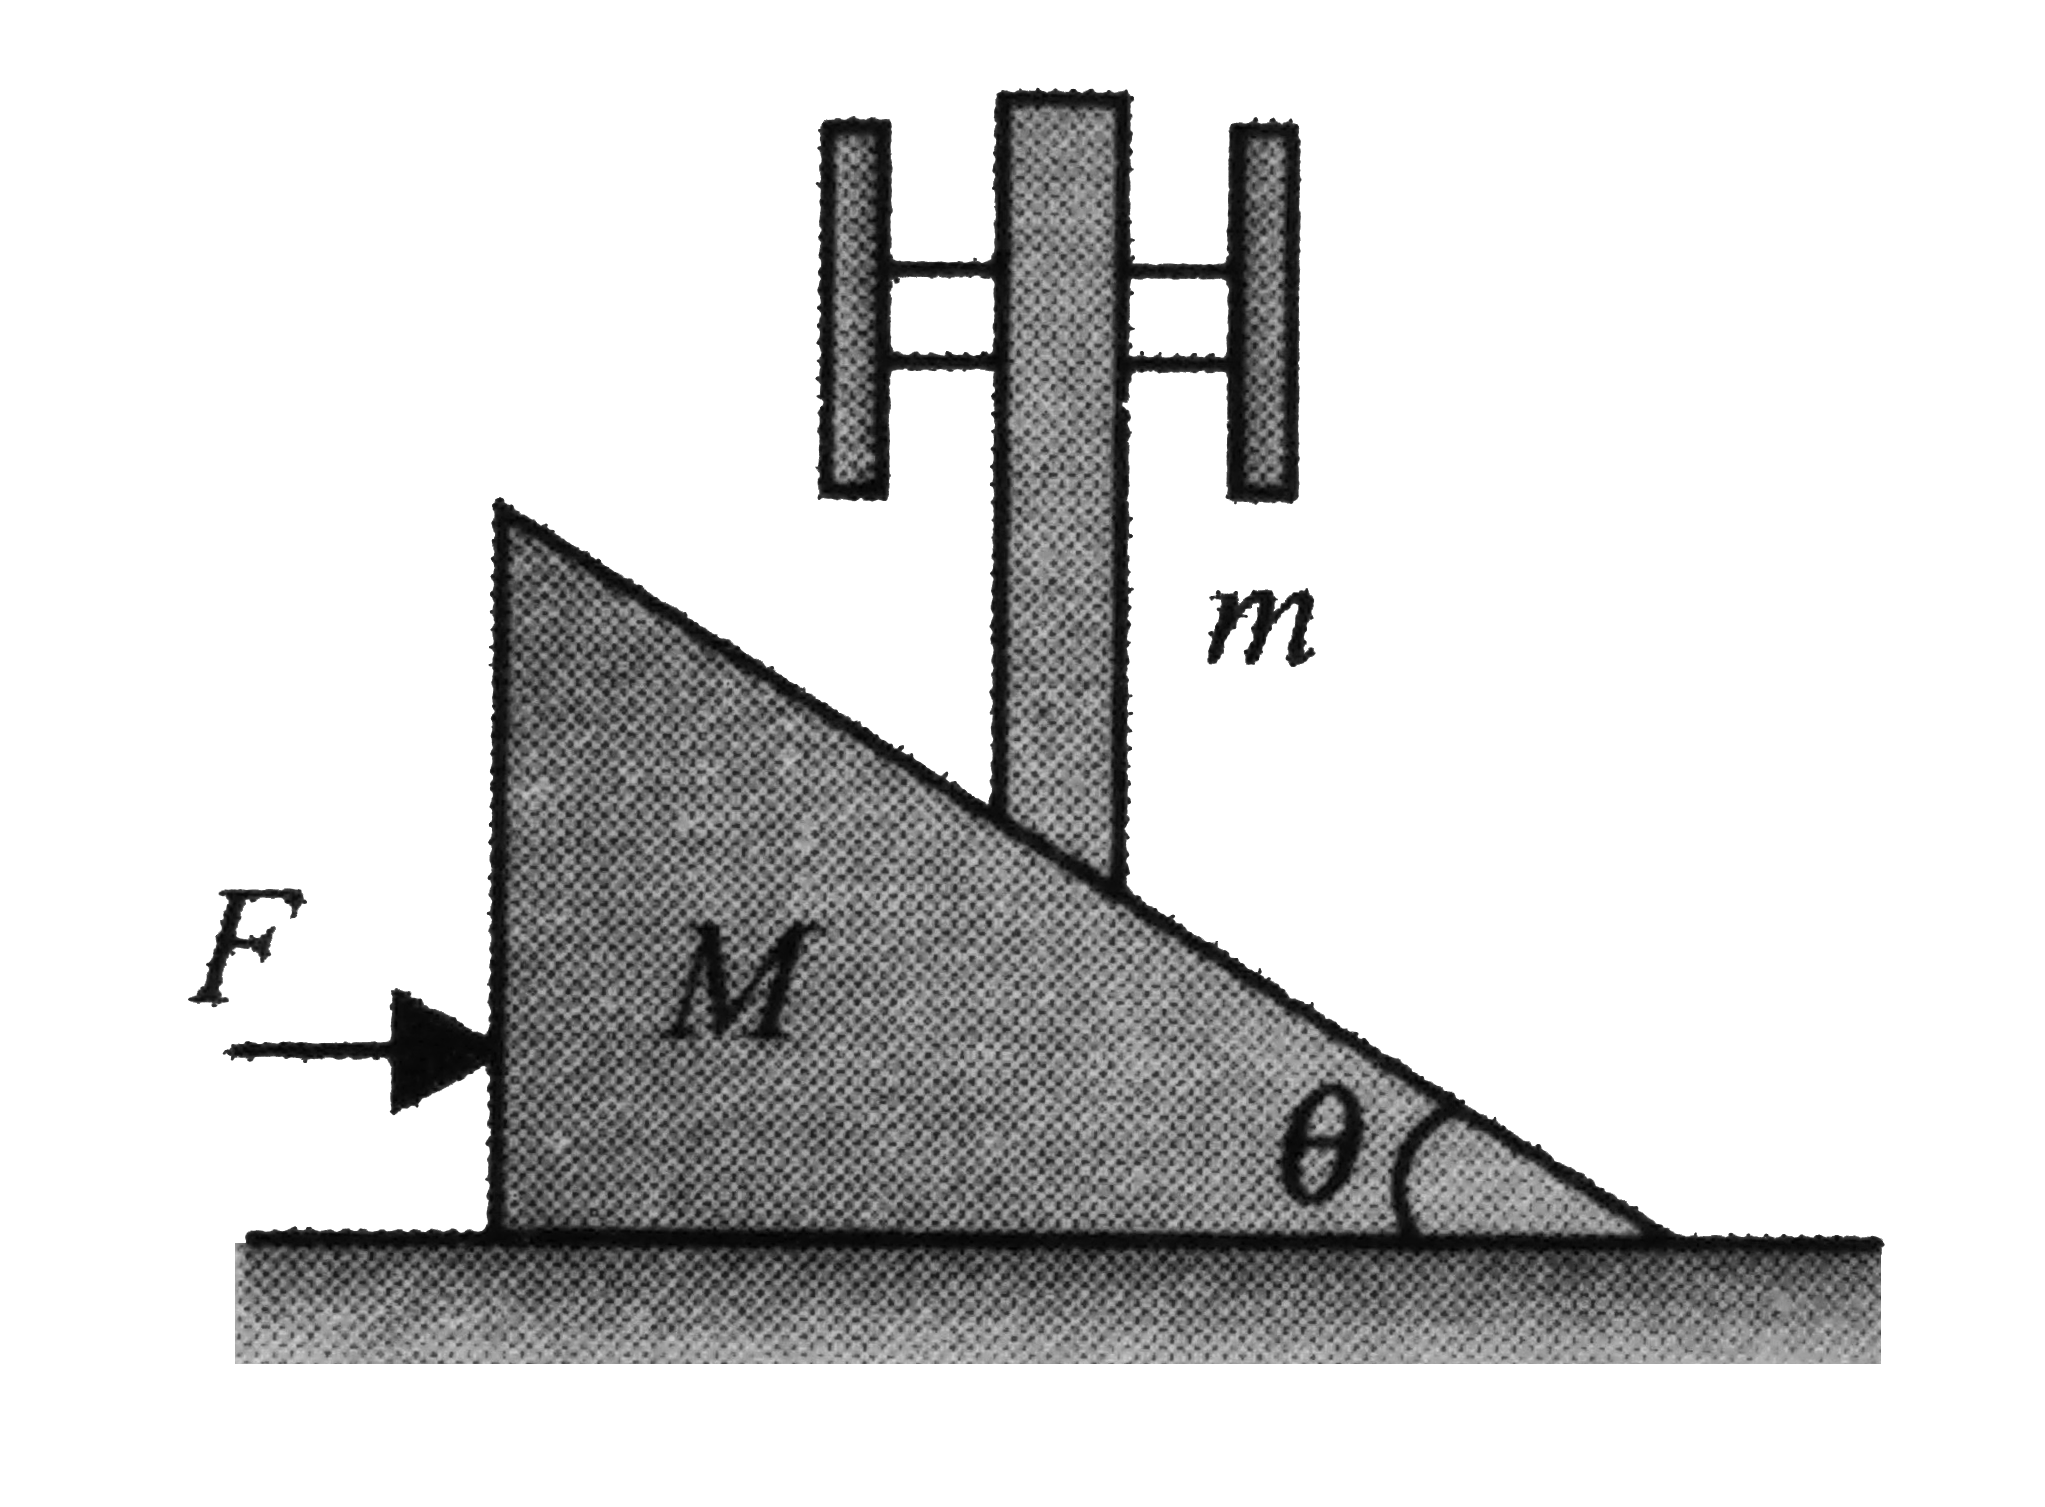 A vertical rod of mass m is kept on a wedge of mass M. If a horizontal force F acts on the wedge and the rod is constrained to move vertically, after releasing the rod-wedge system, (a) find their speeds when the wedge moves through a distance x. (b) What is the power delivered by the rod on the wedge aftre a time t measured from the instant of release?